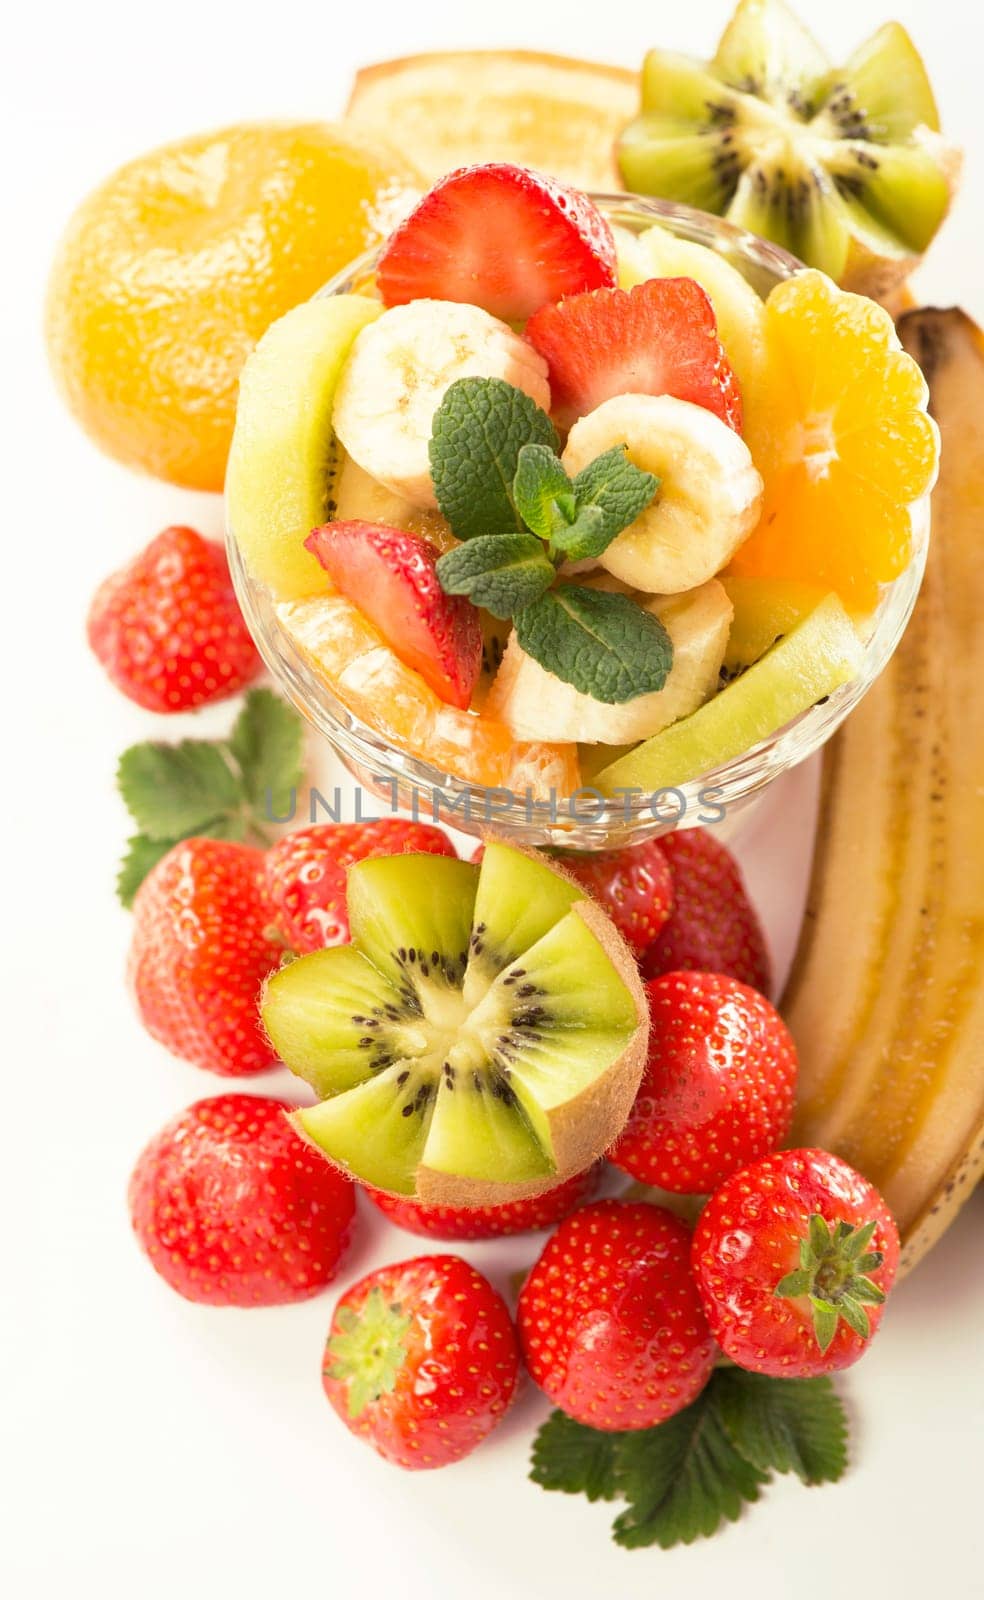 Bananas, kiwi and strawberry and glass bowl with fresh fruits salad by aprilphoto